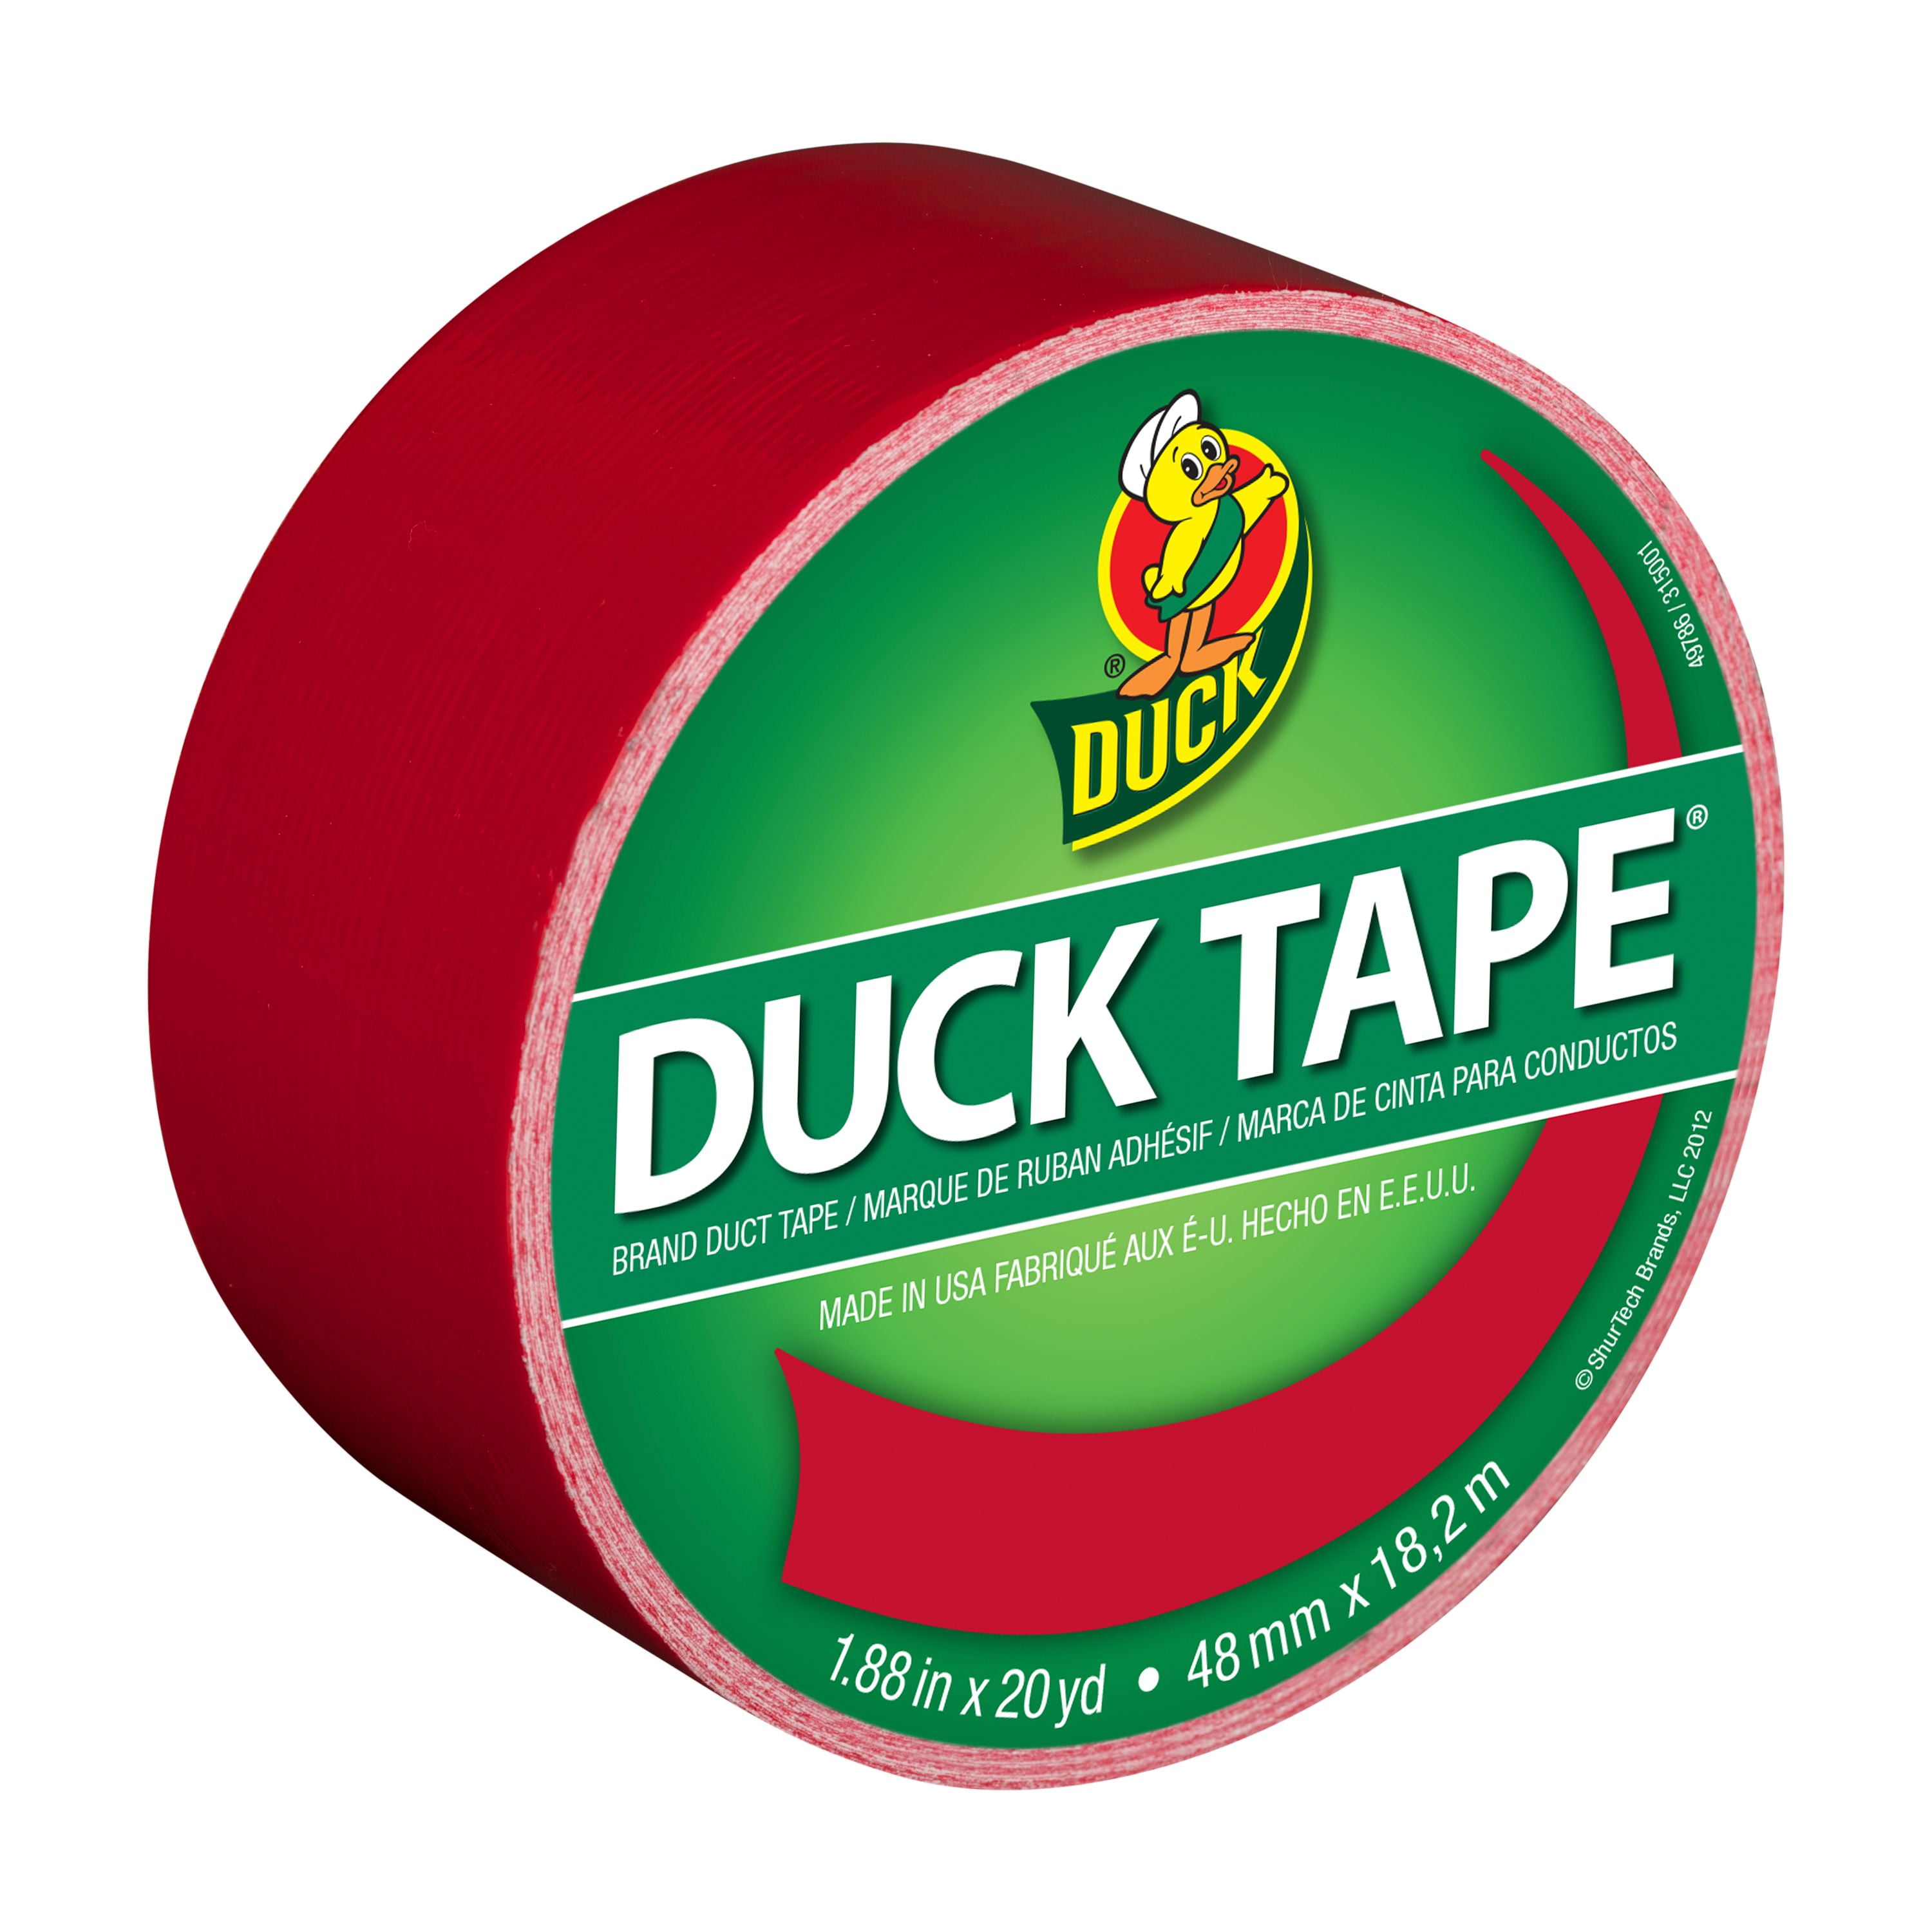  Duck Tape Colored Duct Tape, 1.88 In X 20 Yd, Red :  Learning: Supplies